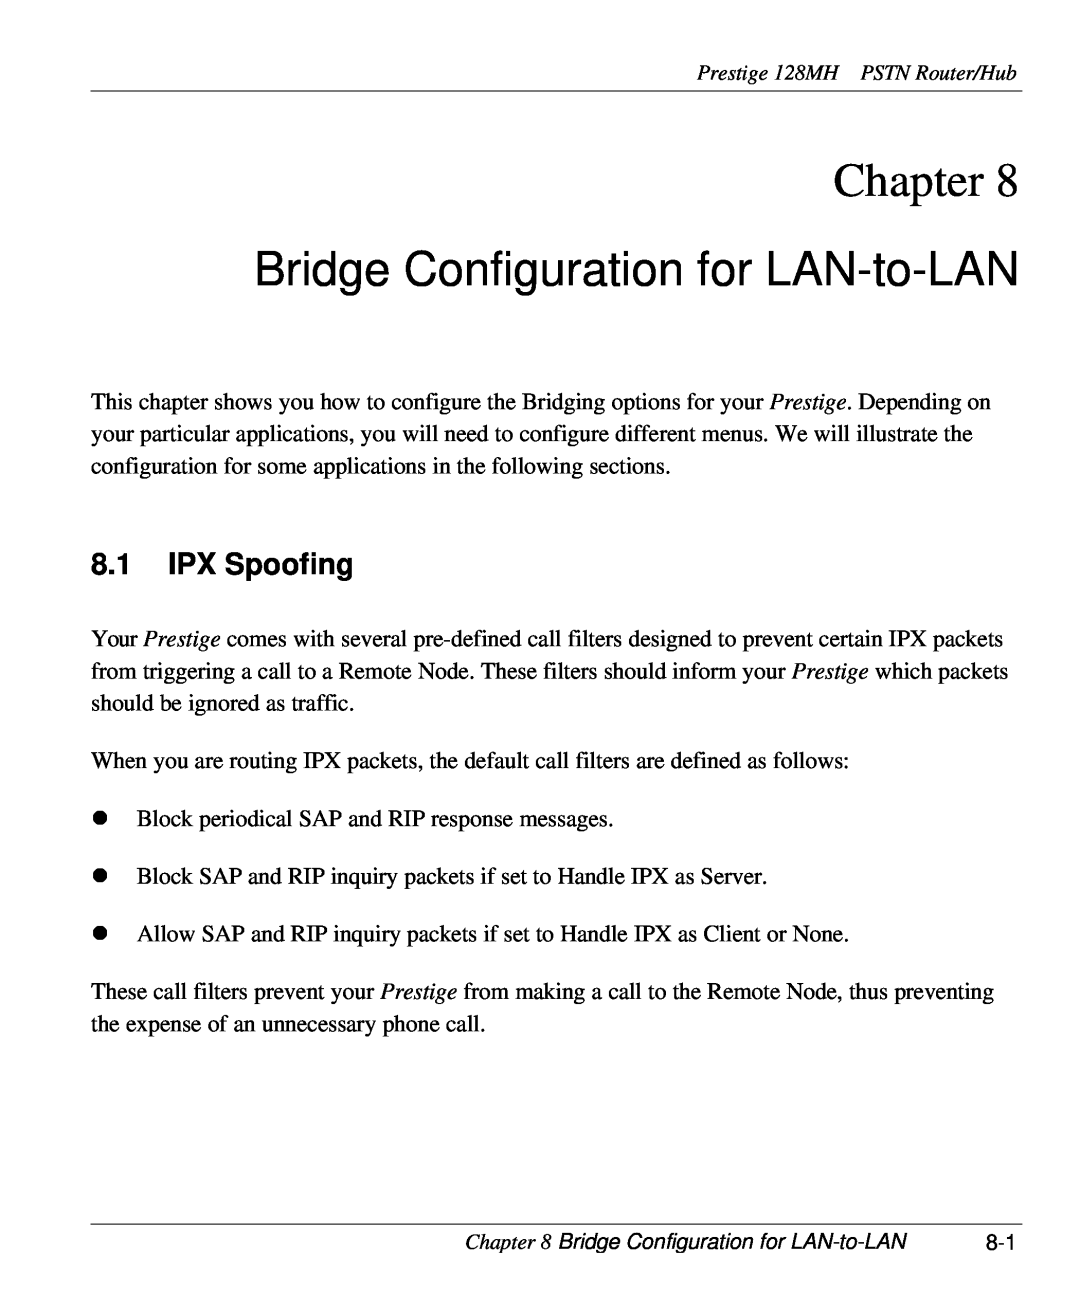 ZyXEL Communications 128MH user manual Bridge Configuration for LAN-to-LAN, IPX Spoofing, Chapter 